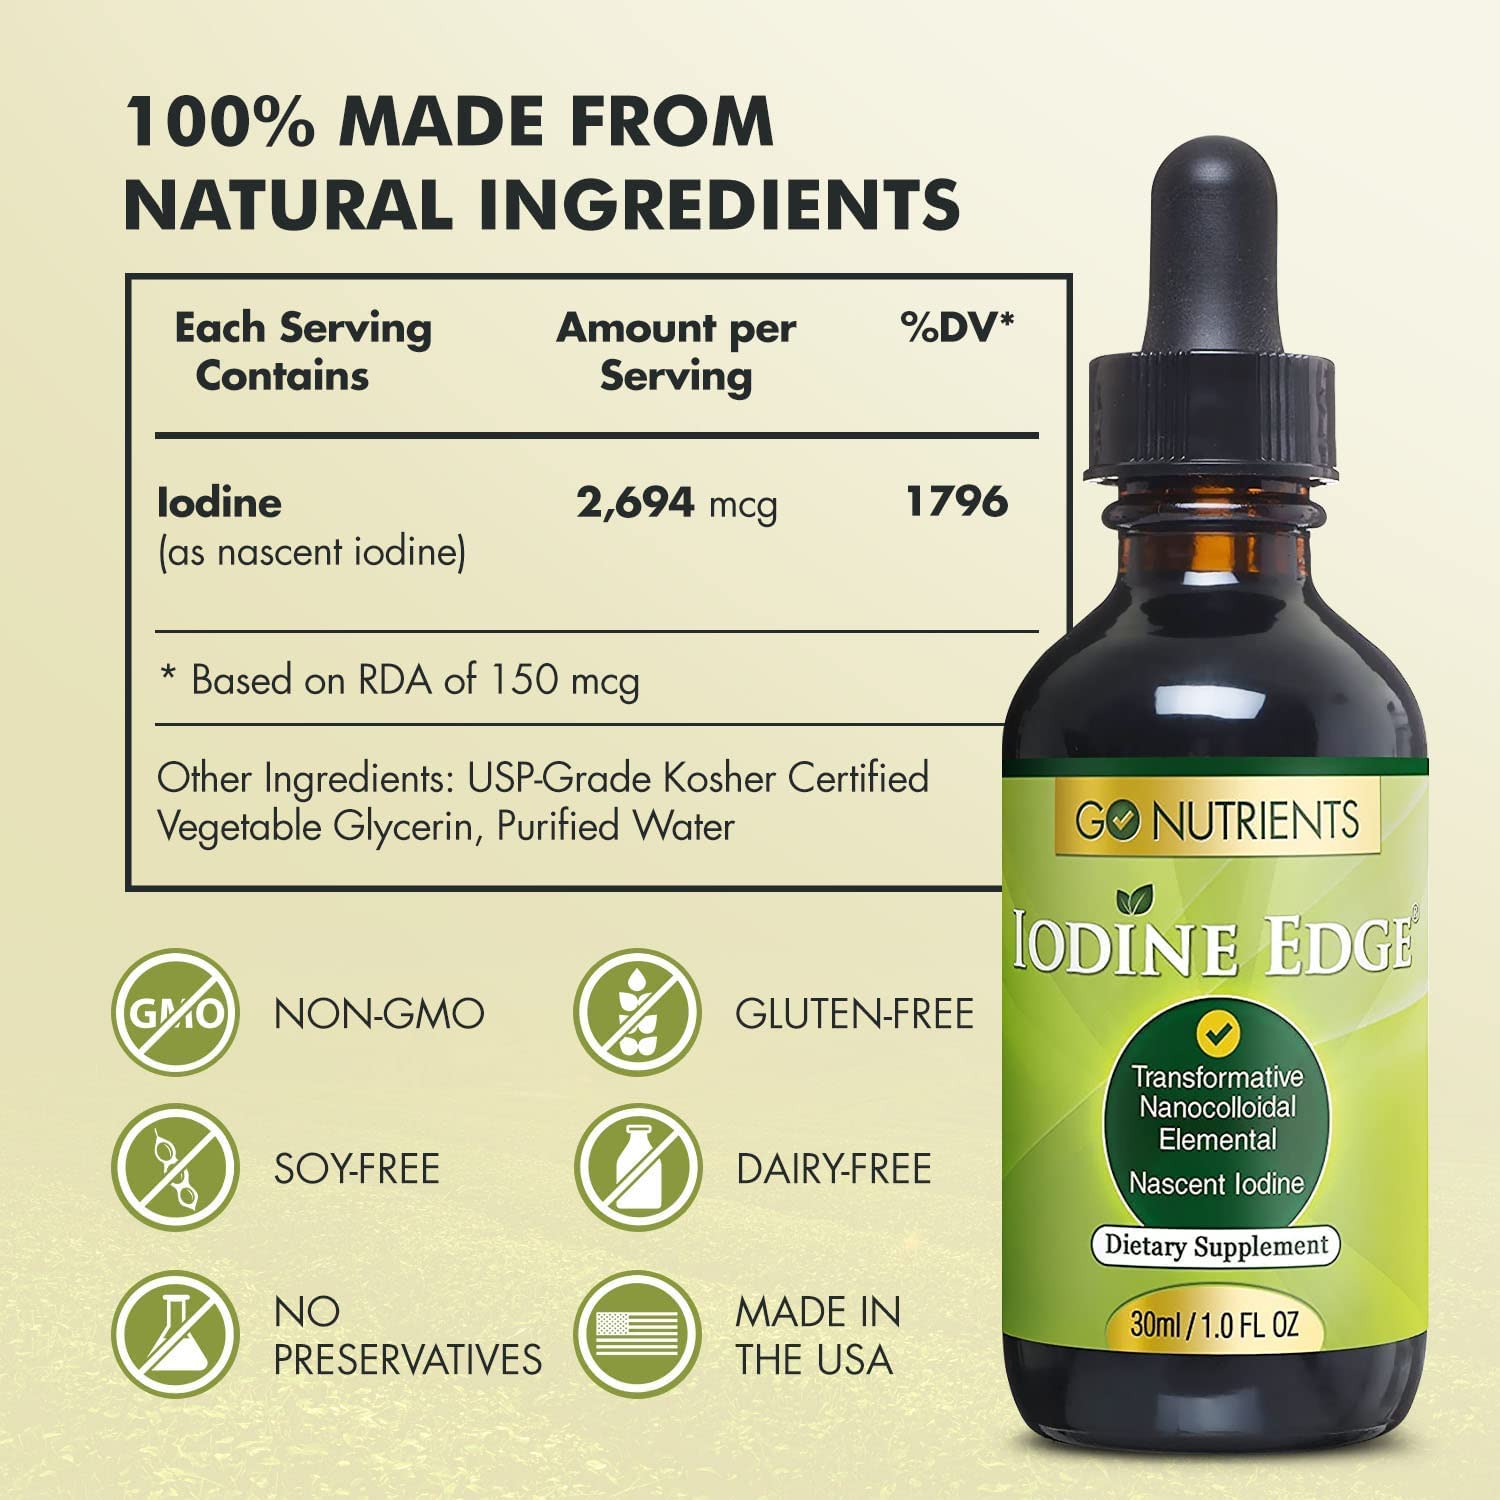 Go Nutrients Liver Edge & Nascent Iodine Supplement | High Potency Liquid Drops - Non-GMO, Gluten-Free Iodine Edge Supplement | Liver Cleanse & Advanced Liver Supplement - Milk Thistle Seed and More